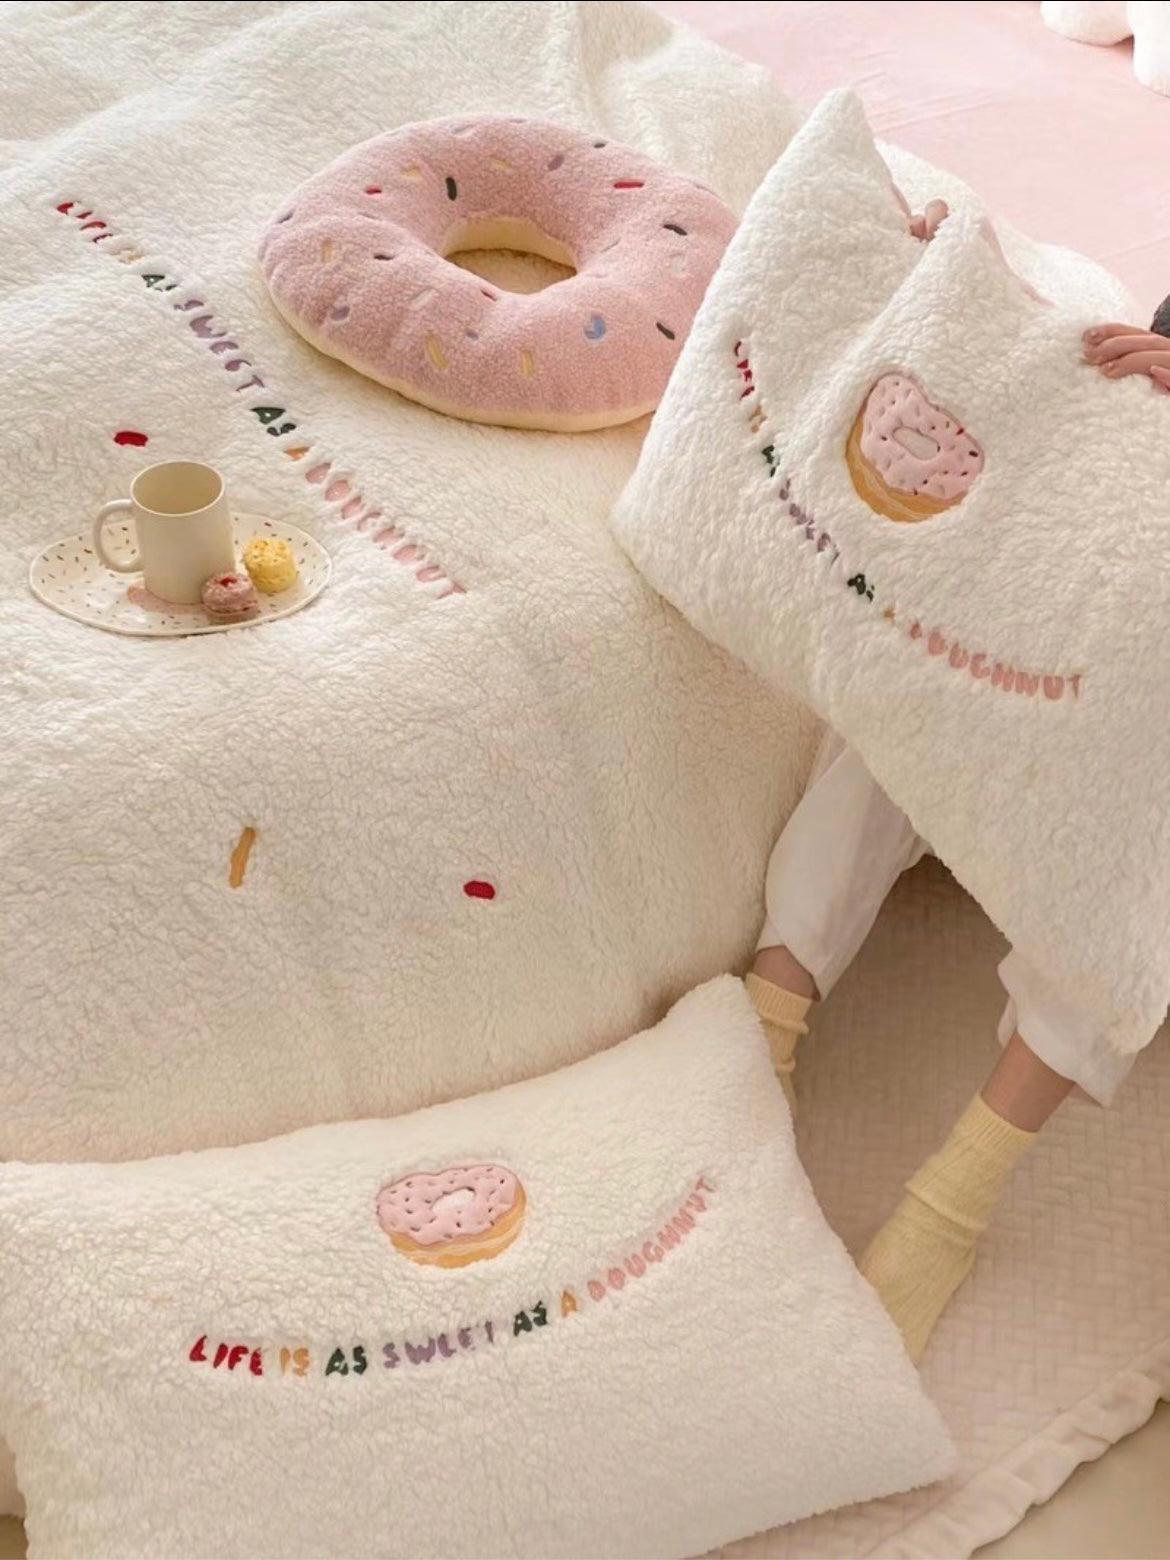 lovevop Donut Soft Lambswool Warm Bed Four Piece Sheet Set